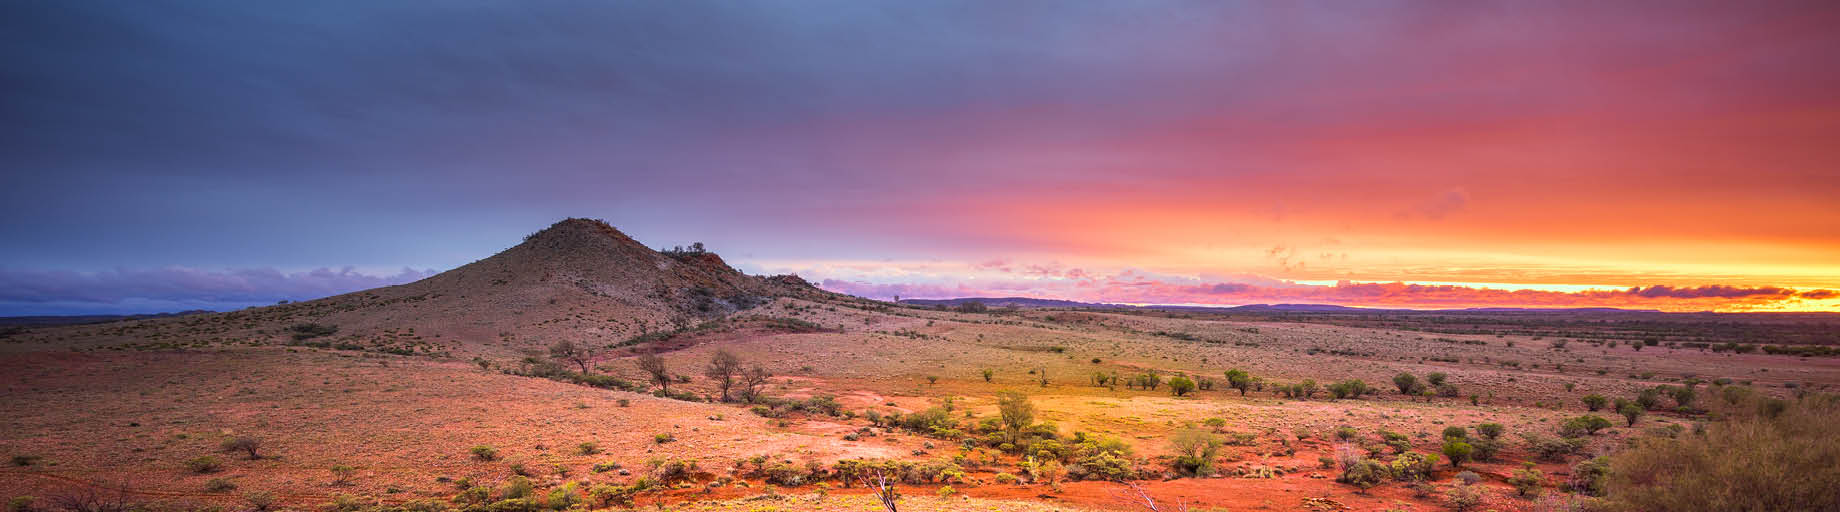 Central Australia Painting Workshop with Robyn Collier